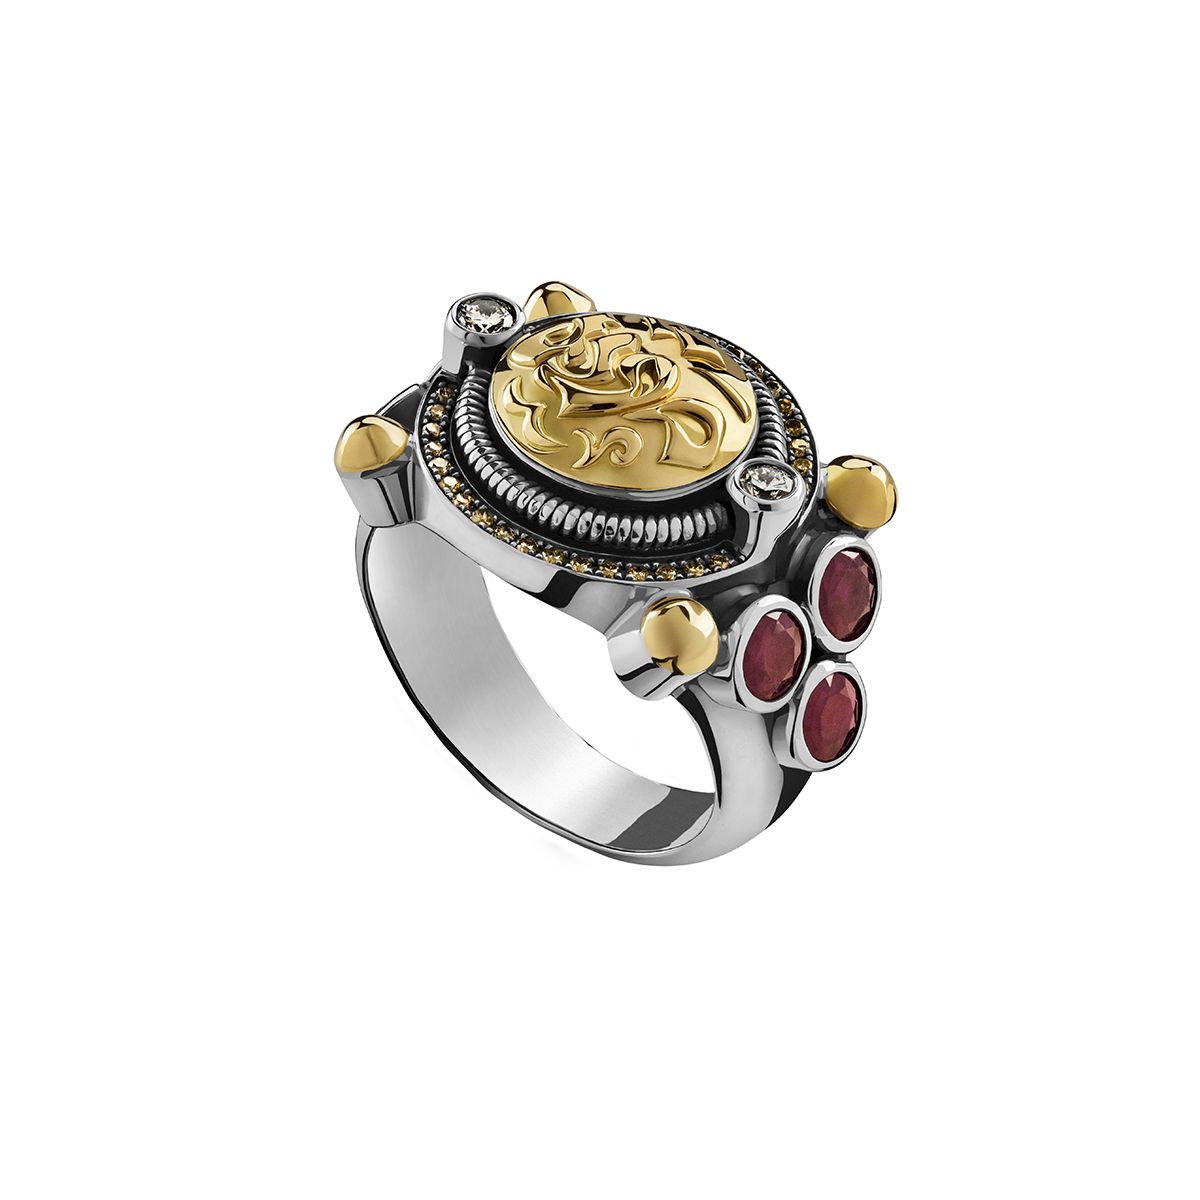 Classic Calligraphy Ring by Azza Fahmy - Designer Rings